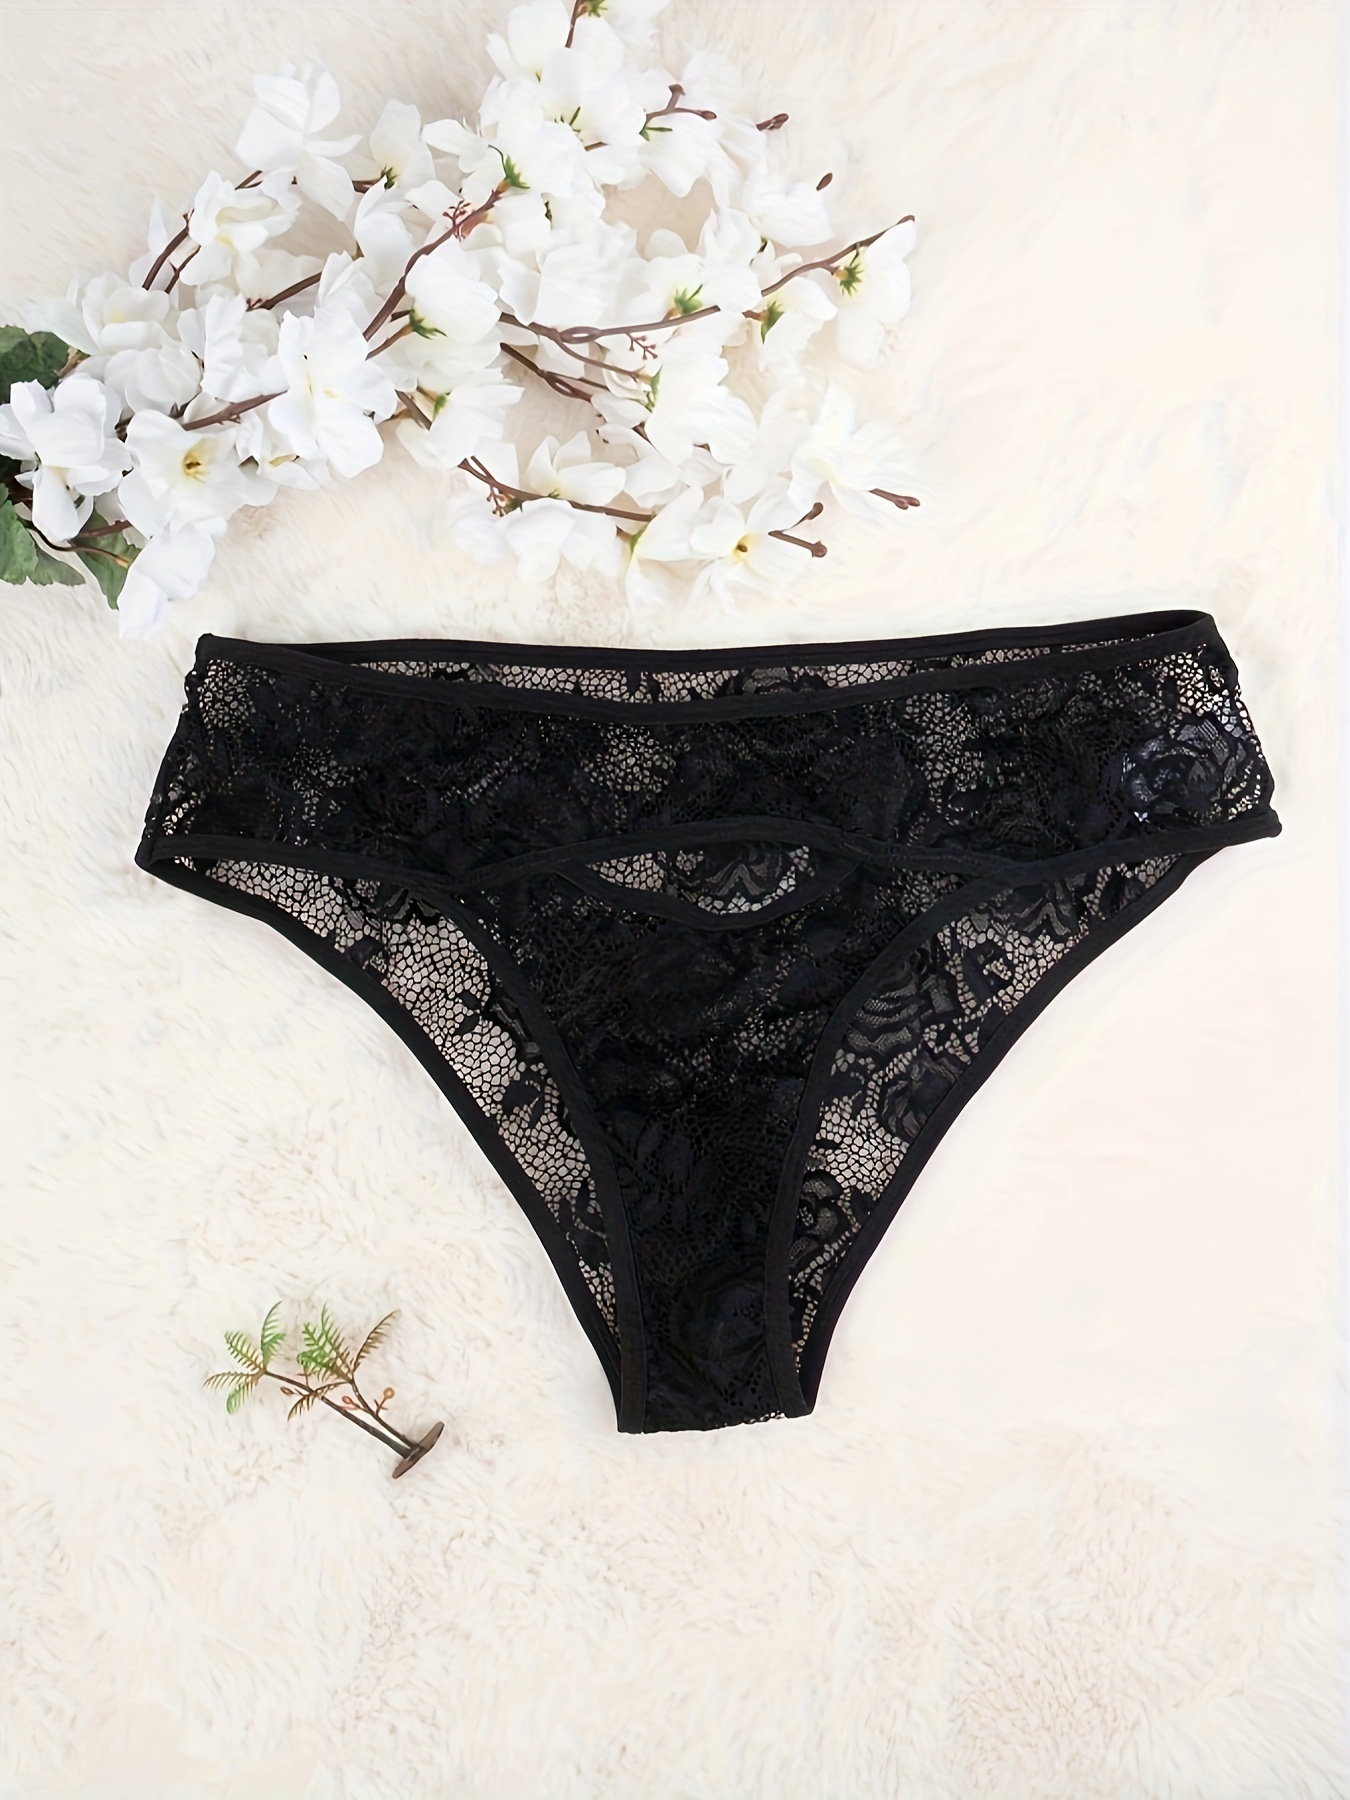 Breathable Embroidered Black Lace Crotchless Briefs For Women Sexy